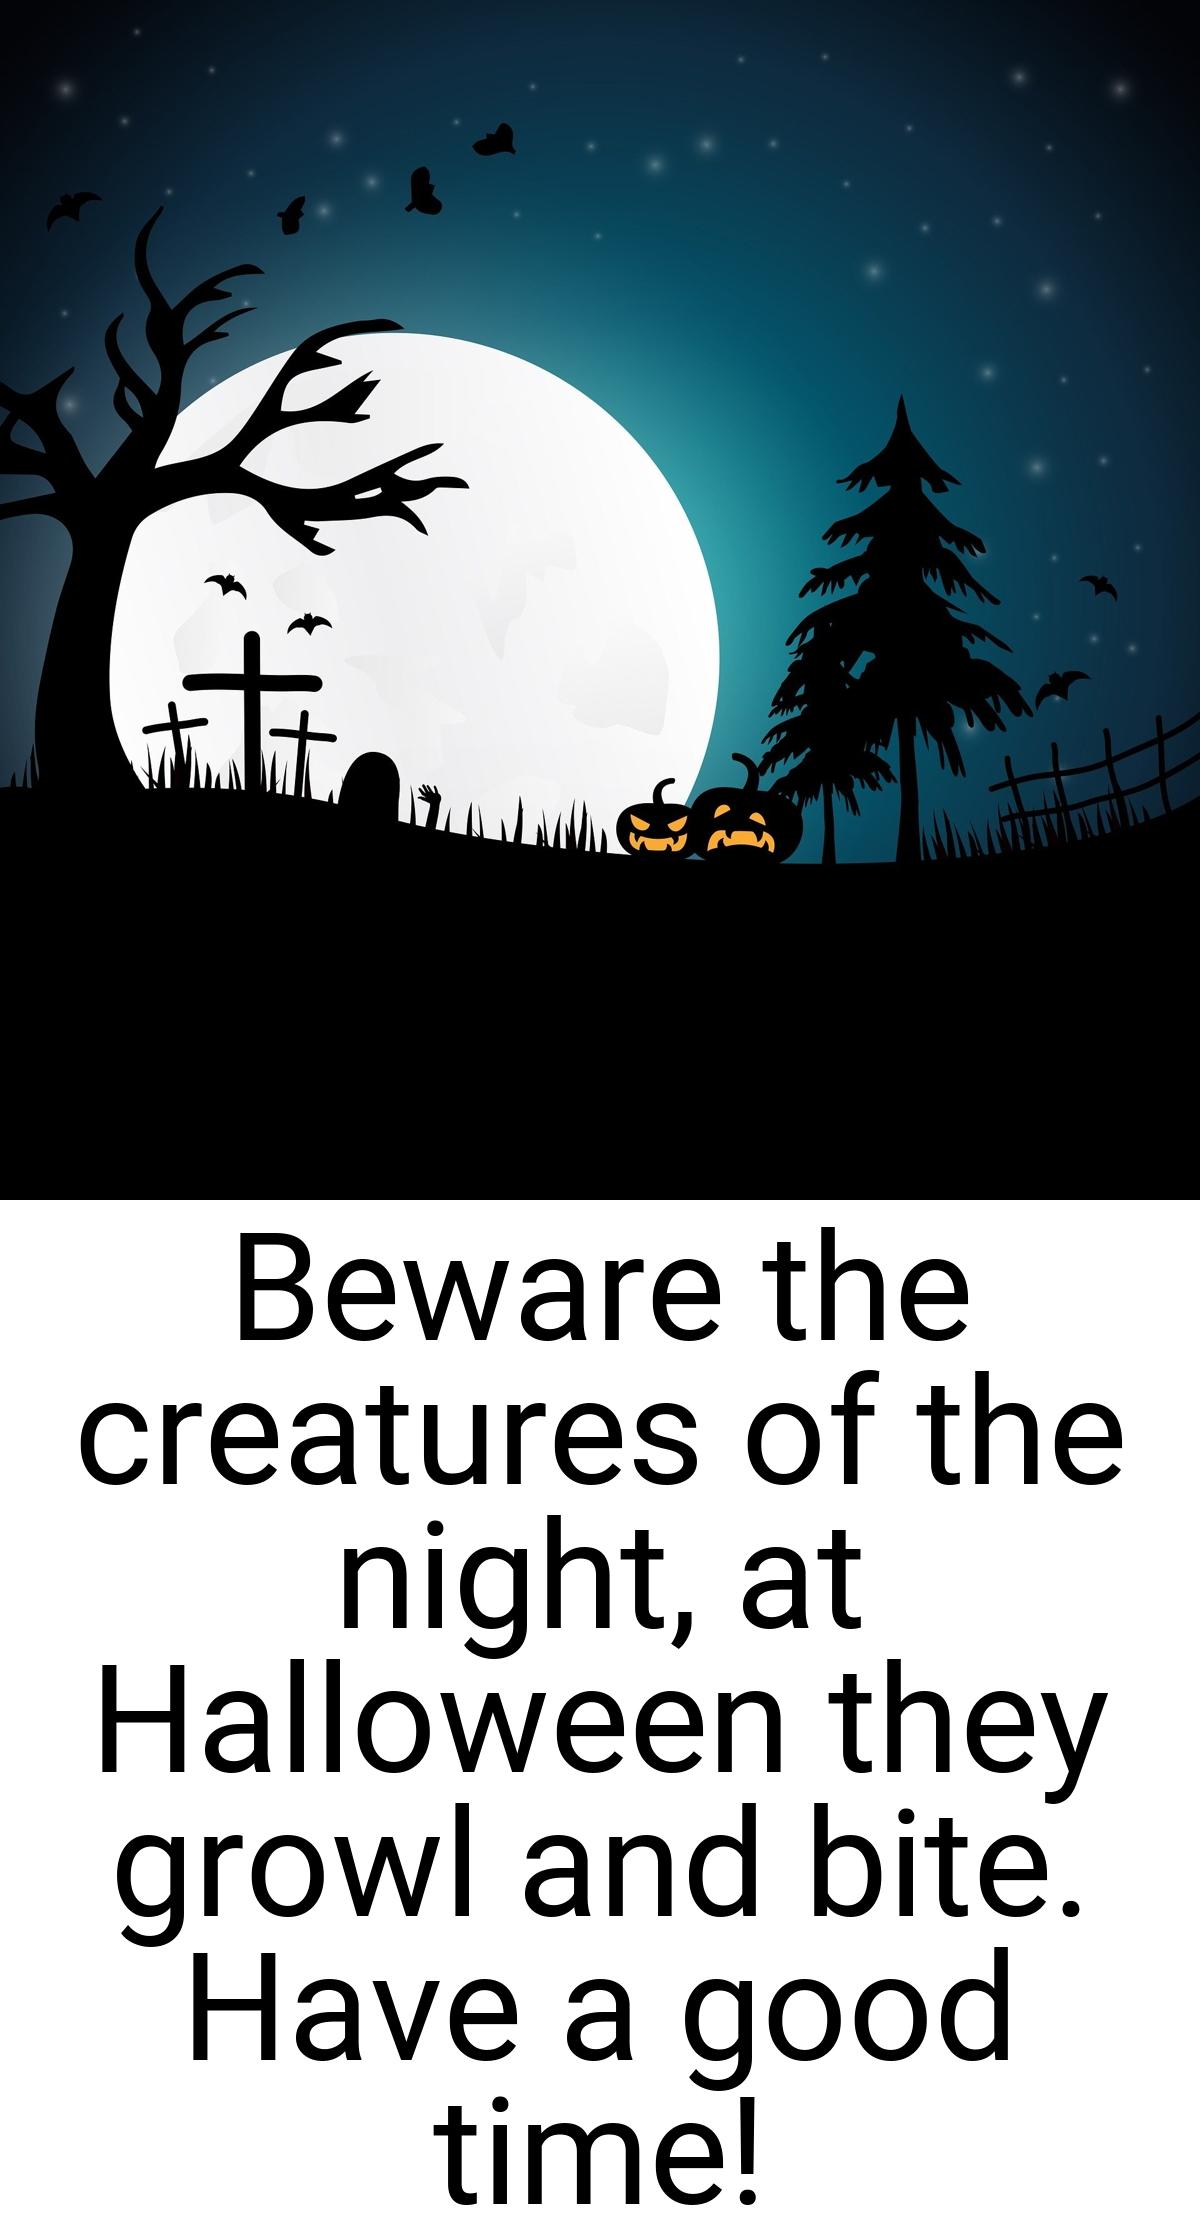 Beware the creatures of the night, at Halloween they growl